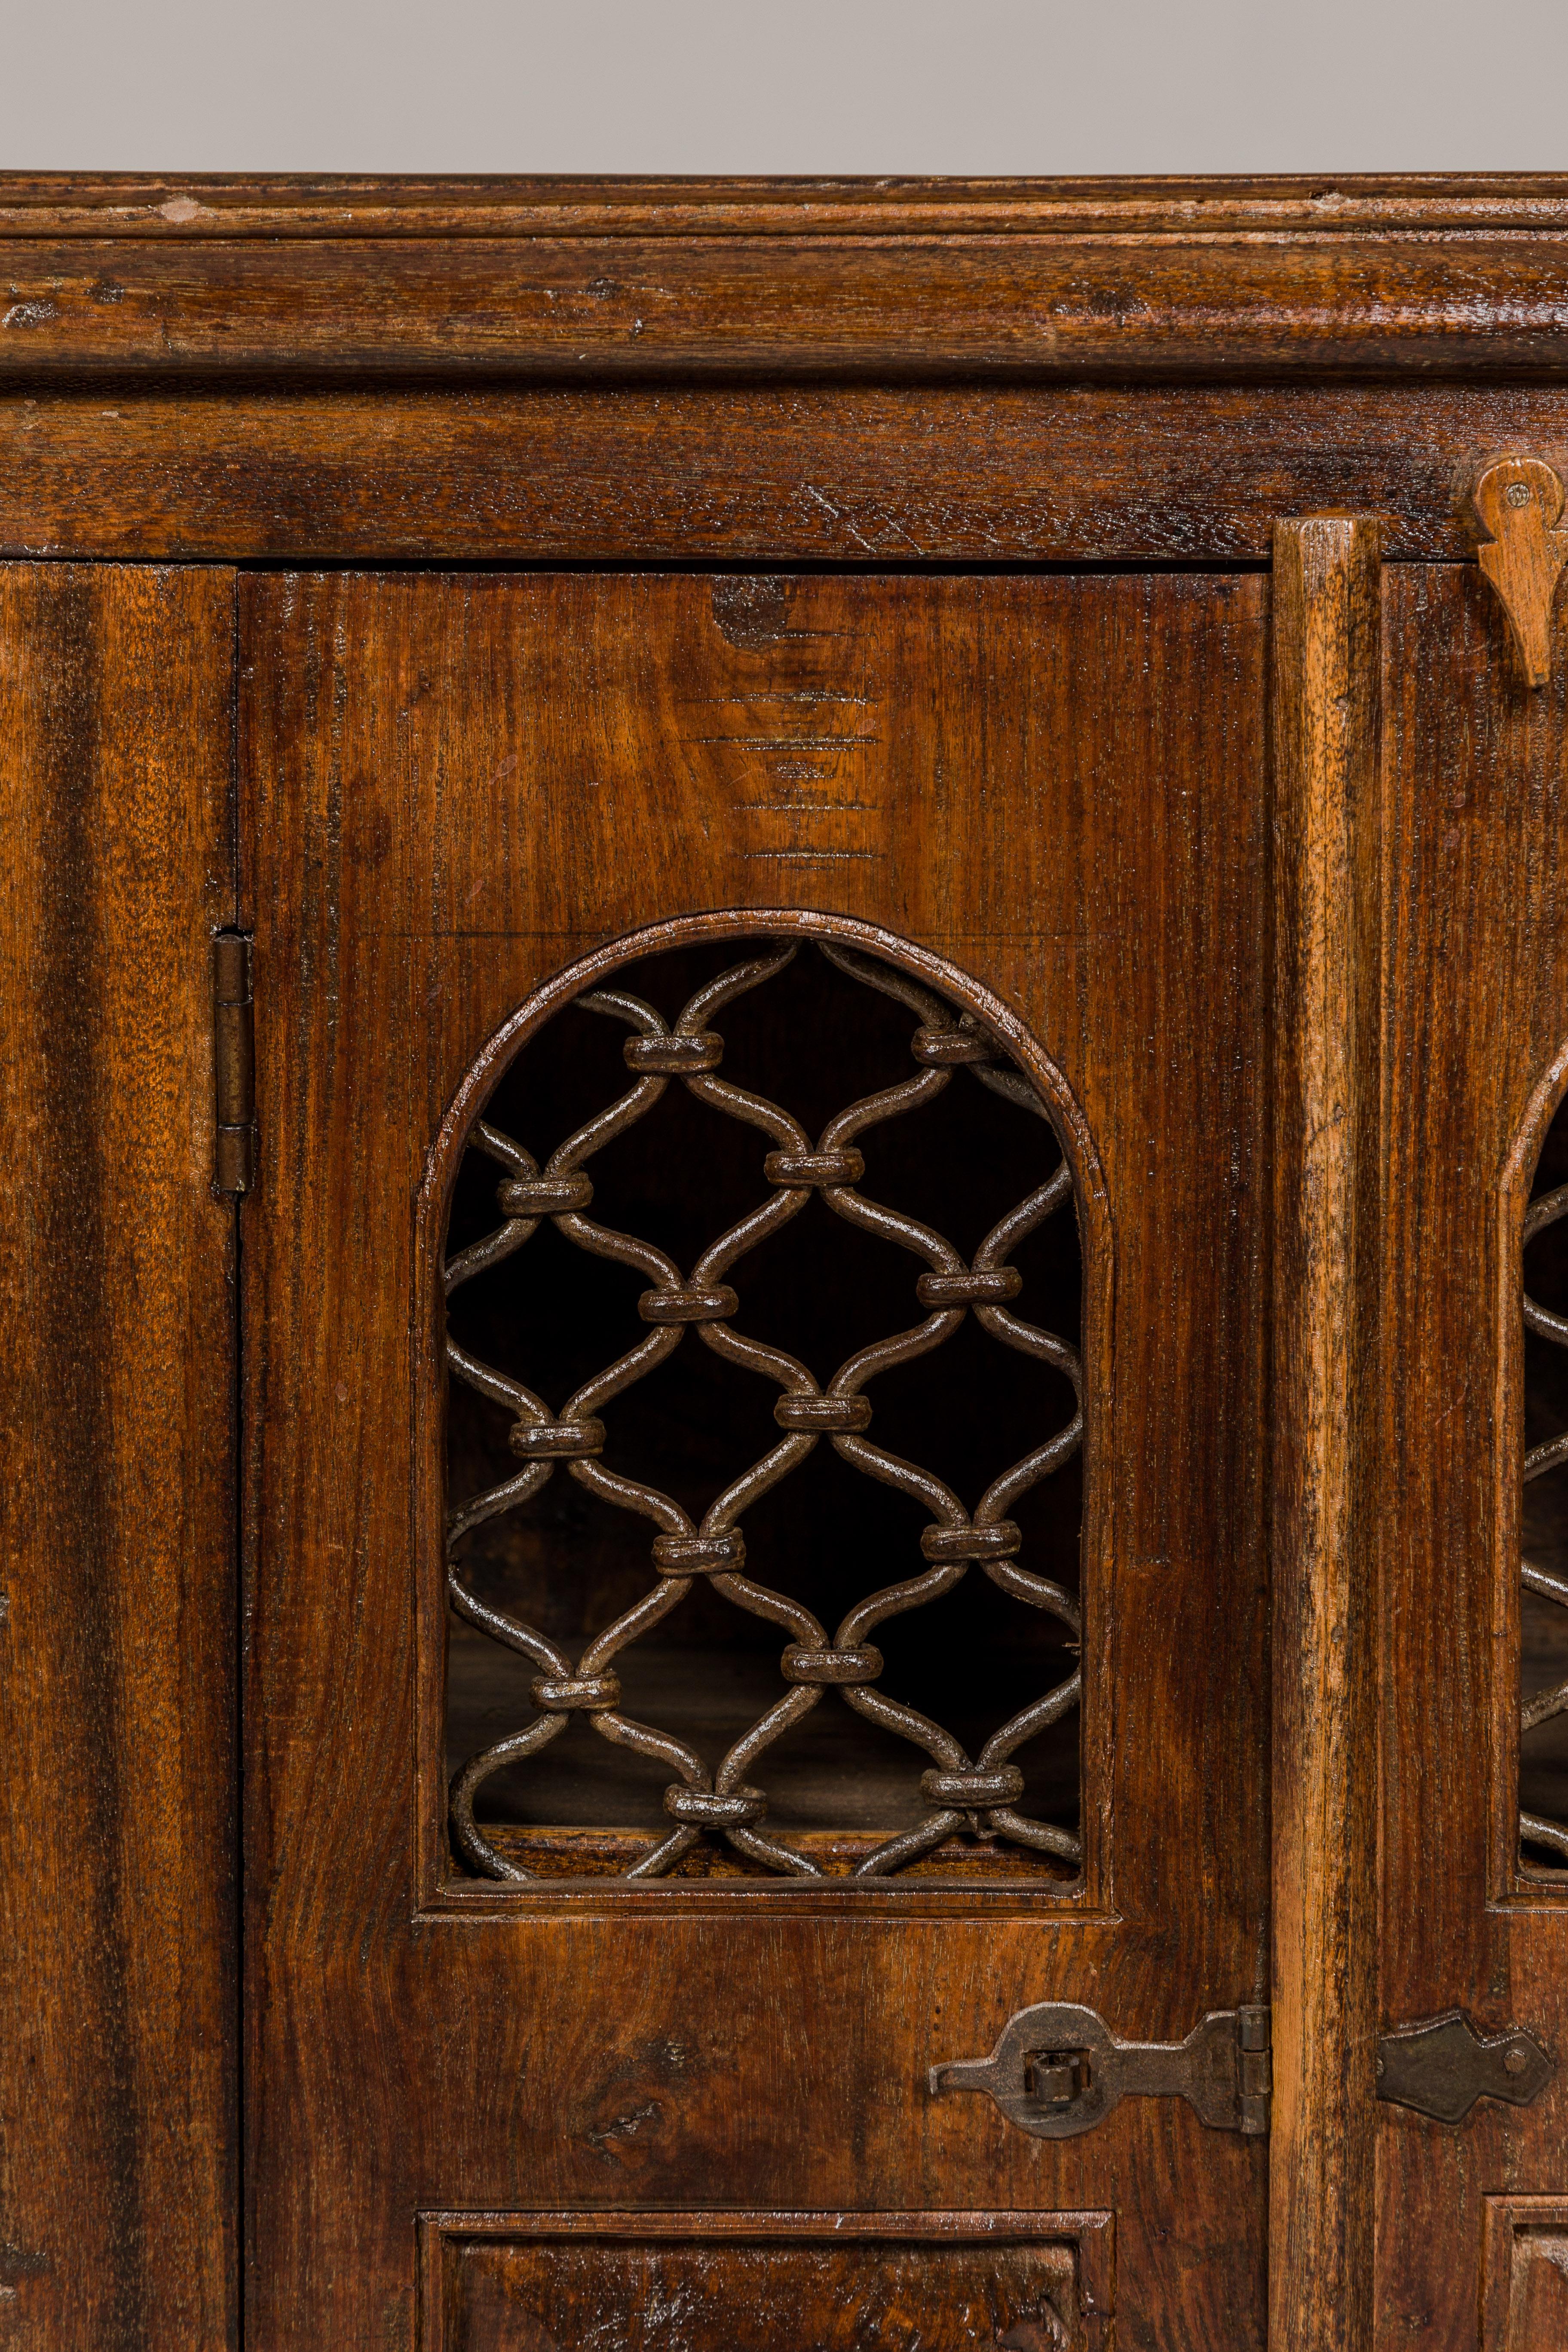 Indian 19th Century Wooden Side Cabinet with Arched Metal Grate Window Door For Sale 3